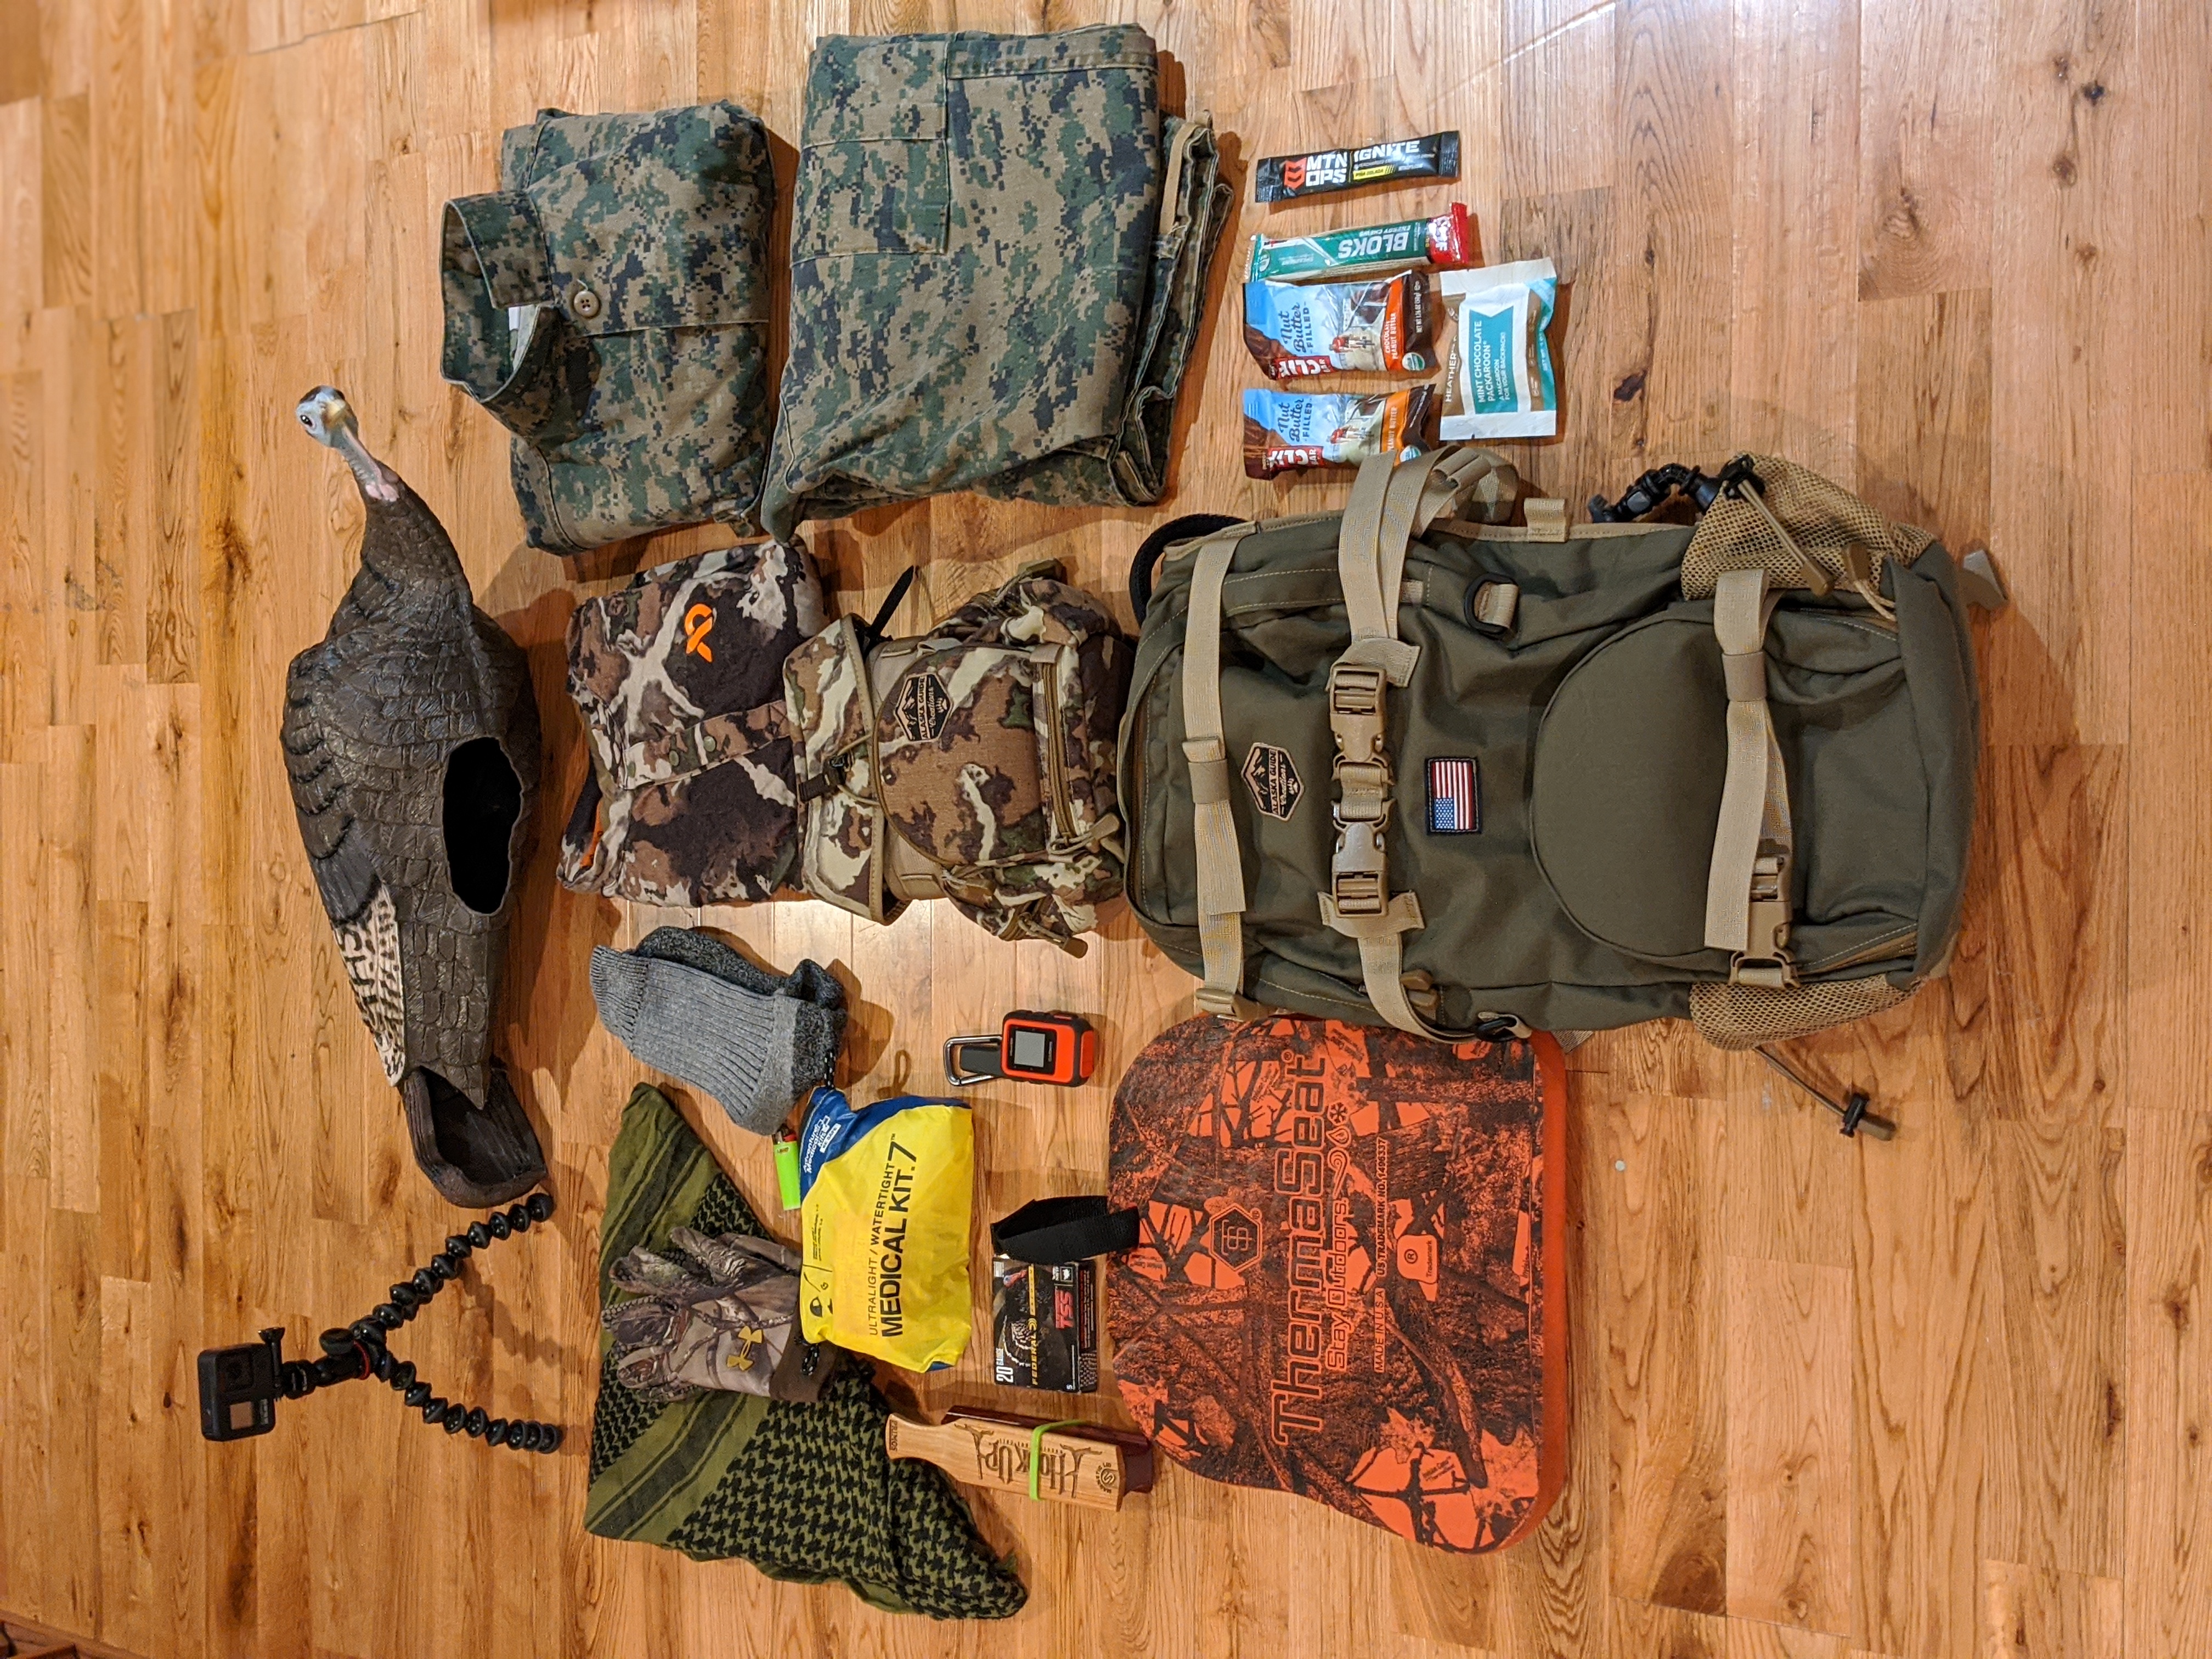 Our spring turkey hunting loadout. Go in light.